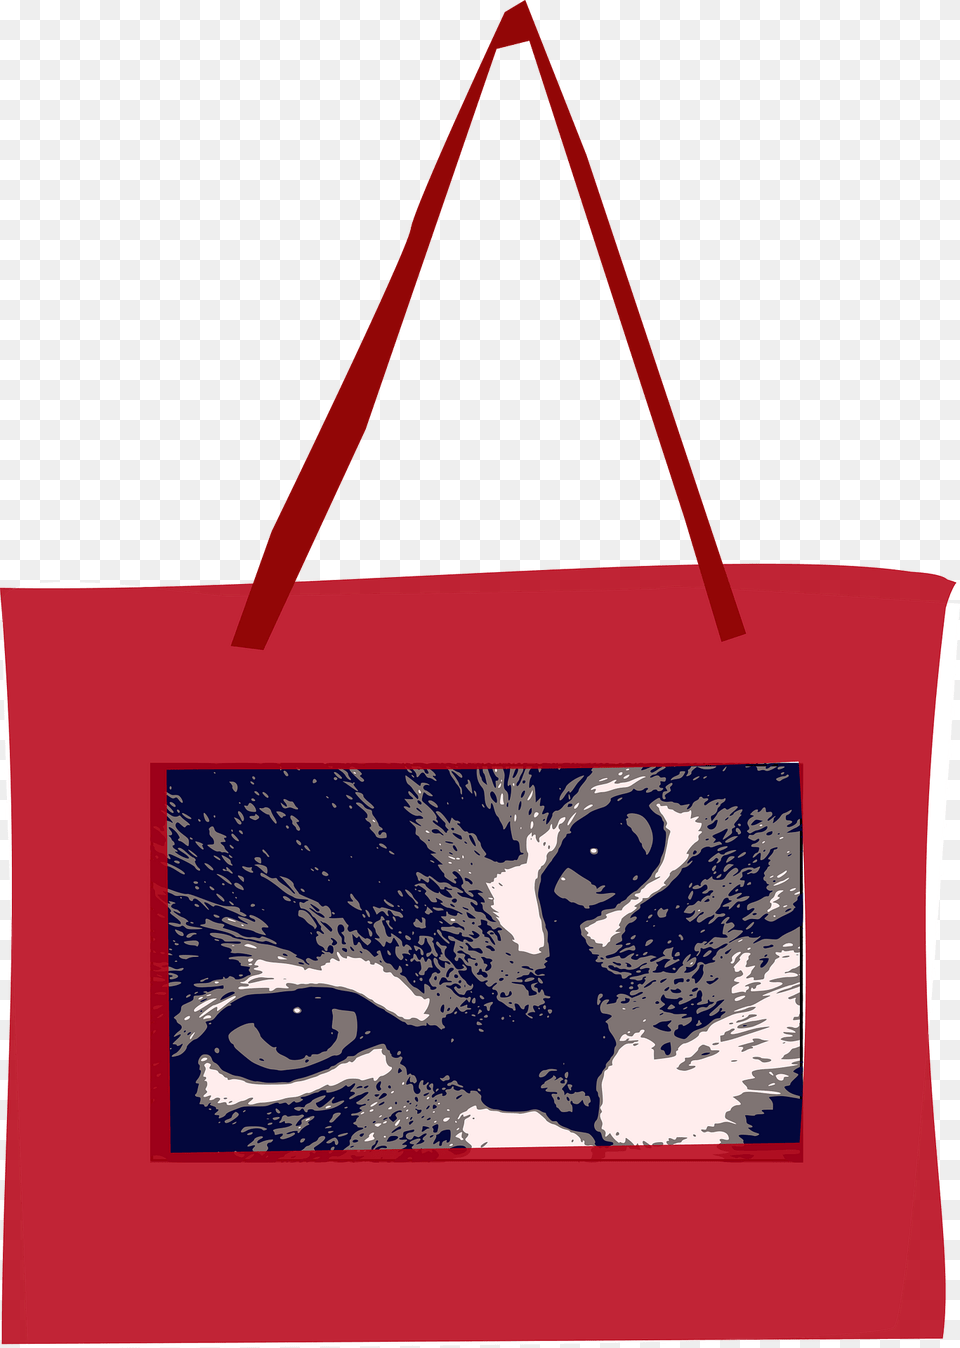 Red Tote Bag With Kitty Design Clipart, Accessories, Handbag, Tote Bag, Purse Png